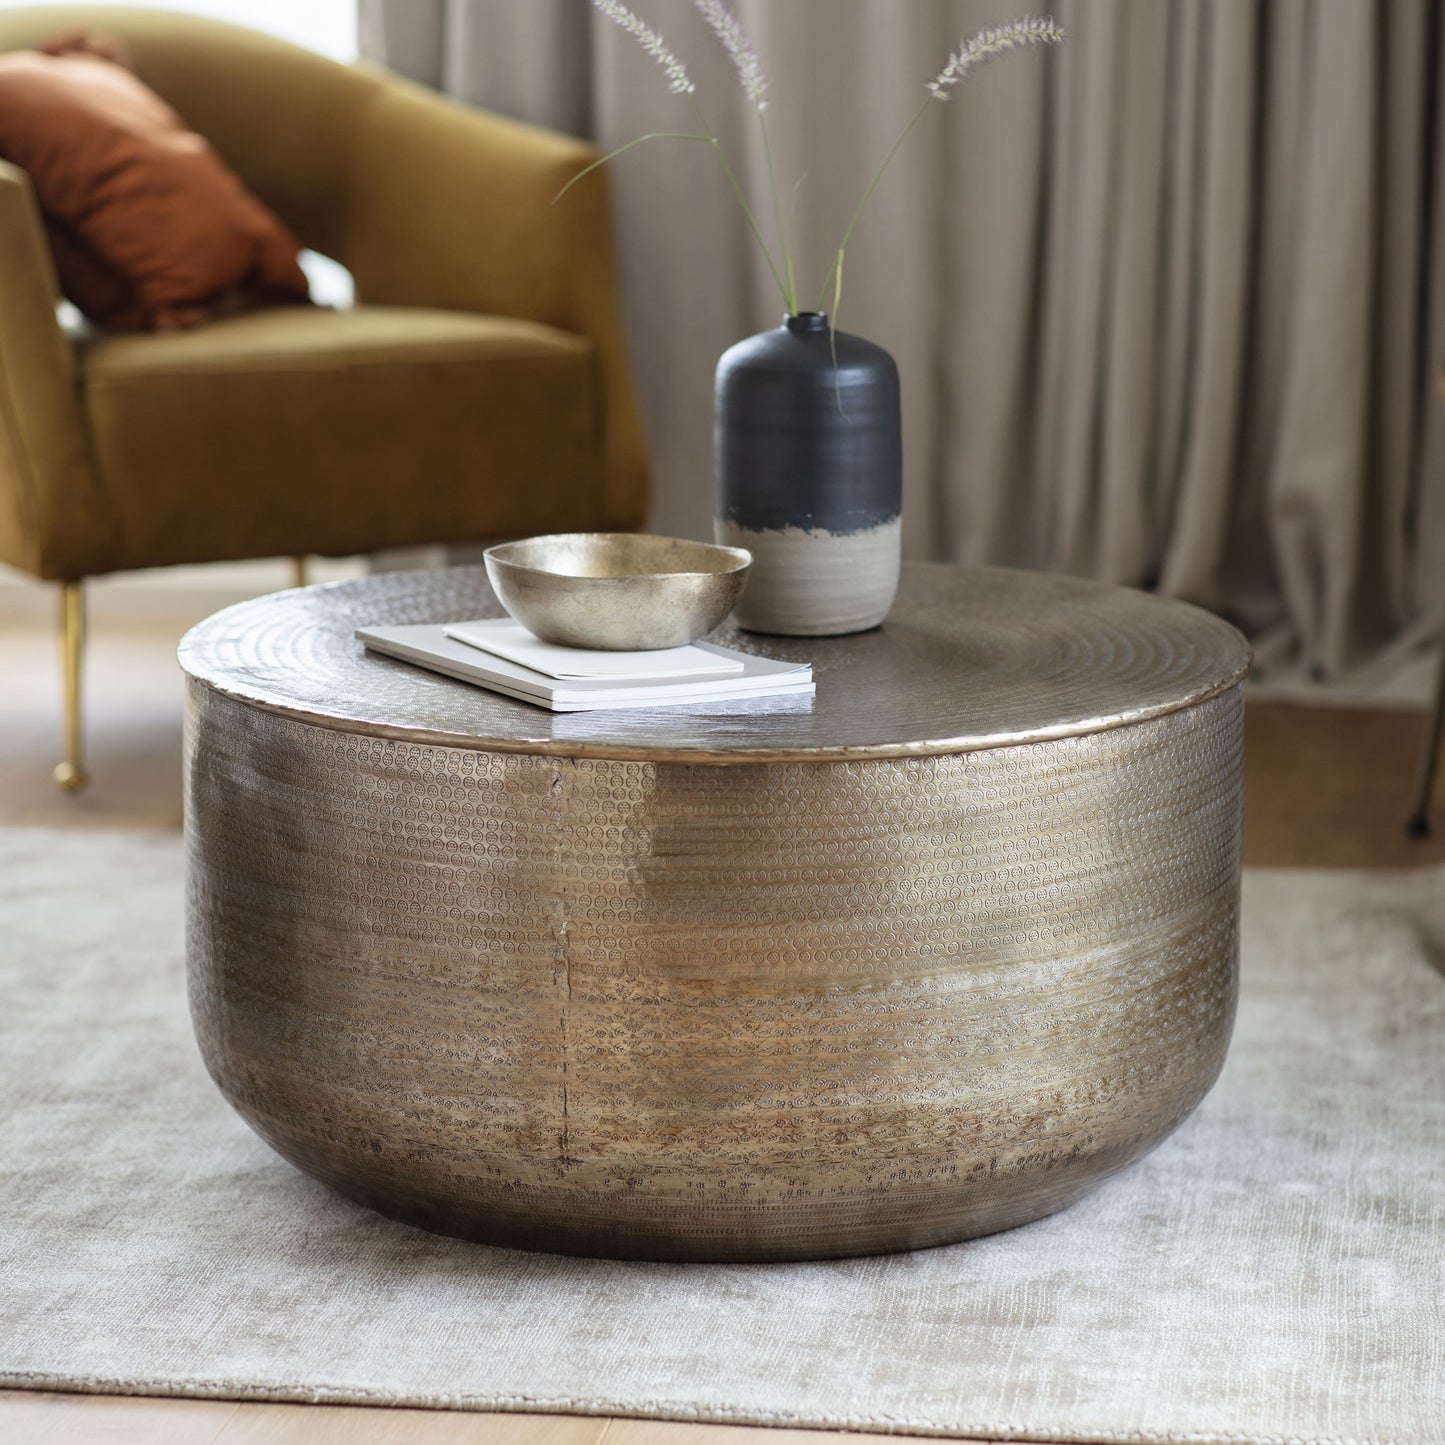 Brass coloured hand pressed metal coffee table in the room setting with flower vase